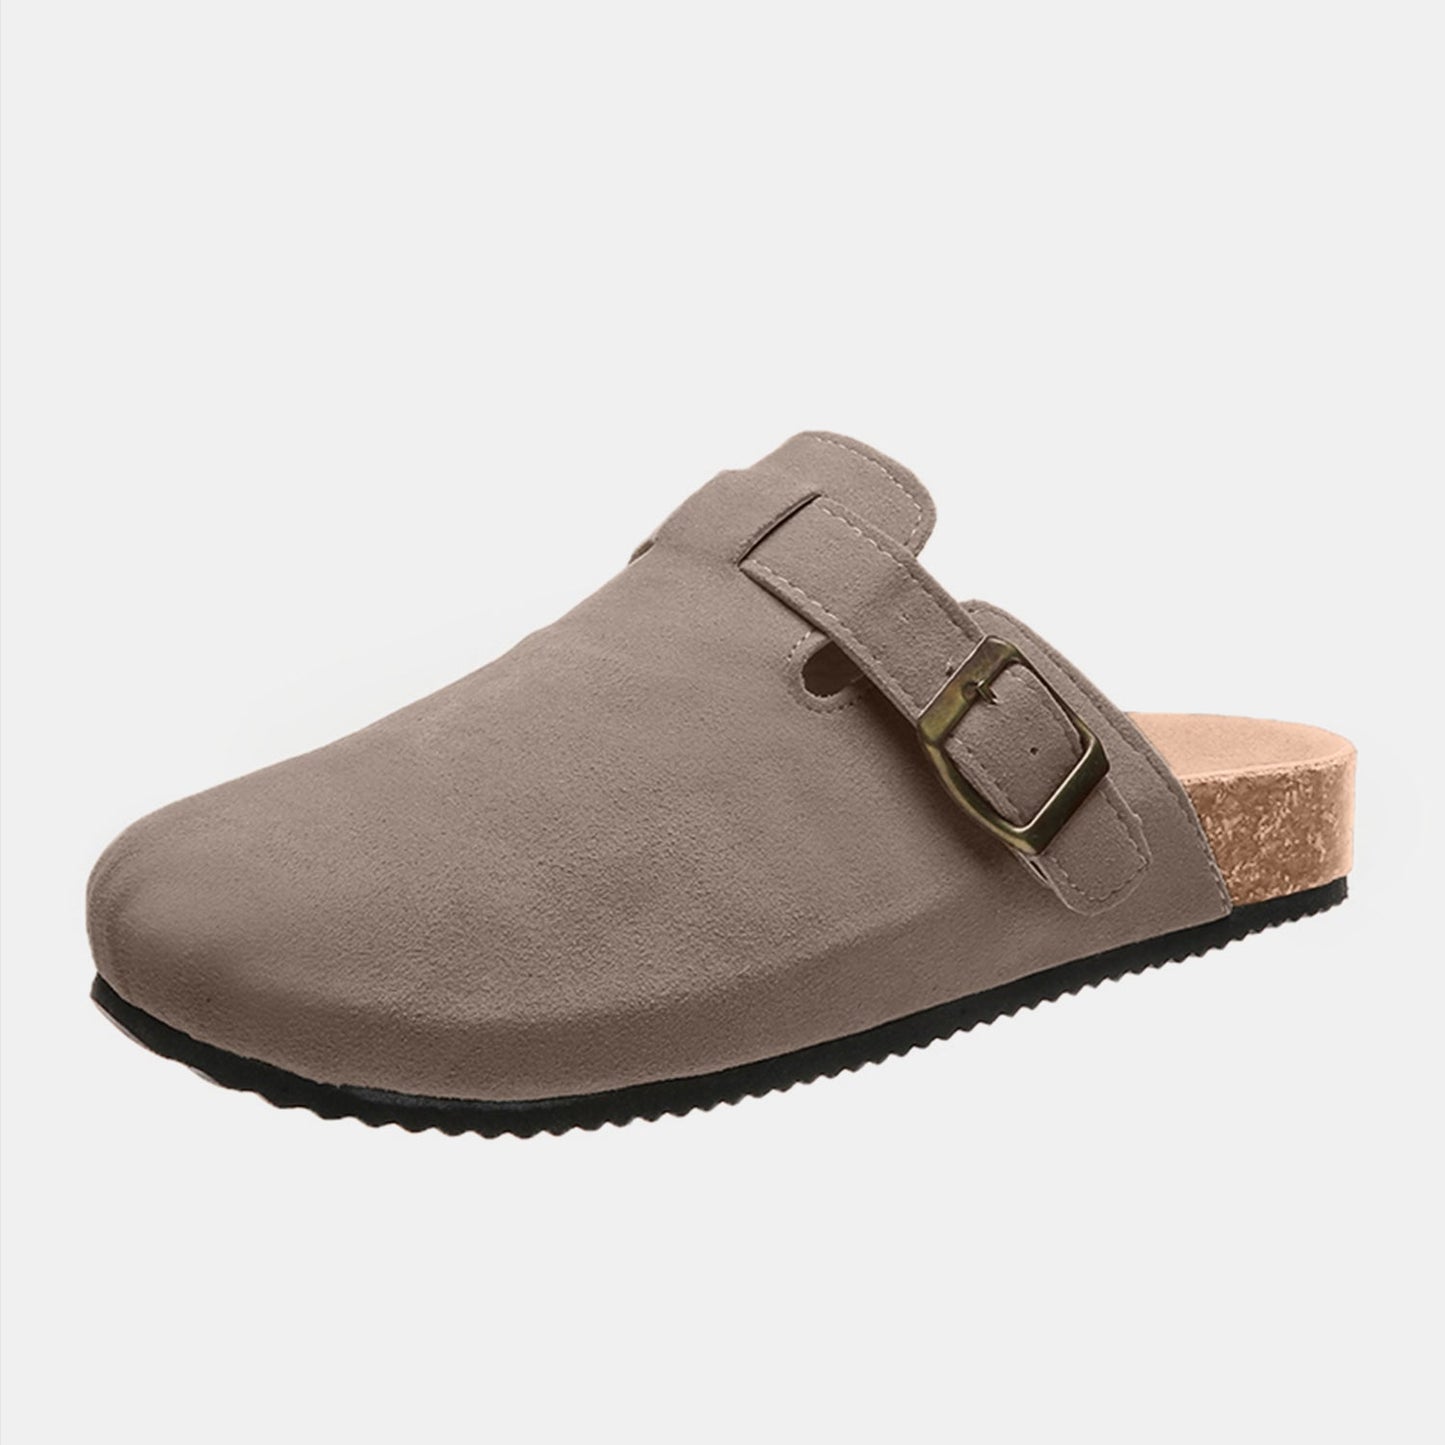 Suede Closed Toe Buckle Slide Charcoal / 7.5